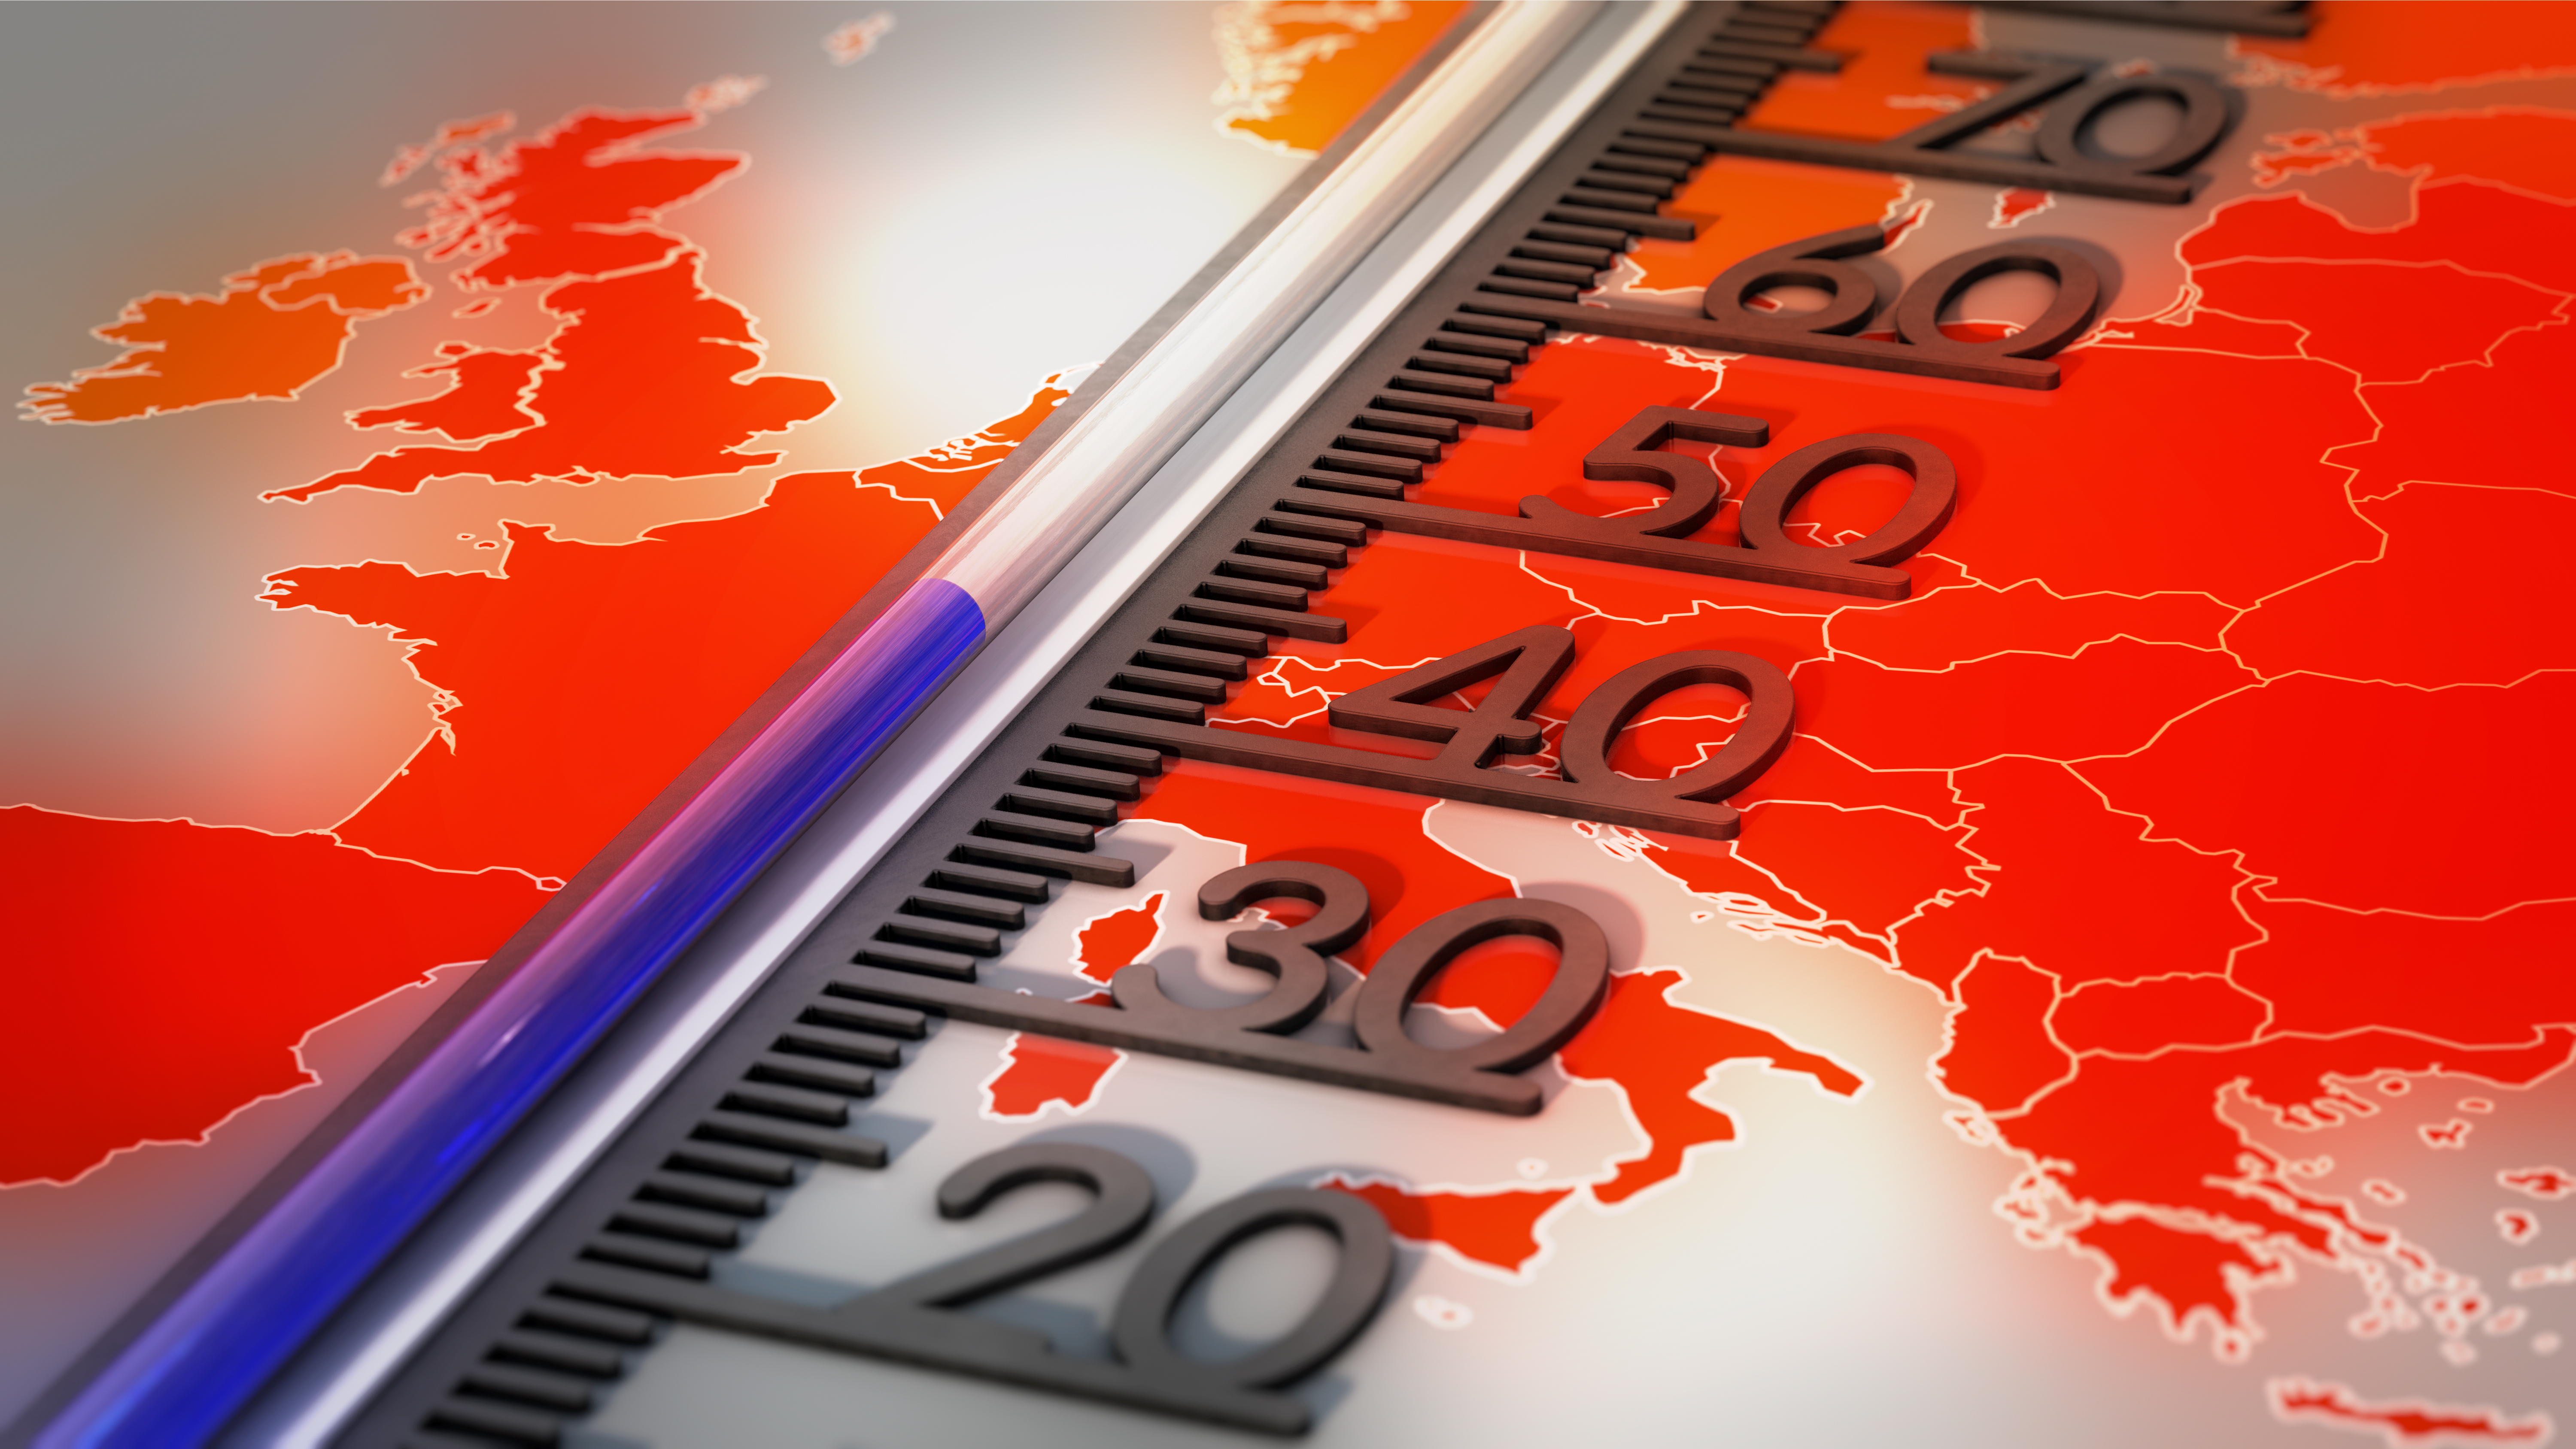 Thermometer over Europe showing extreme heat